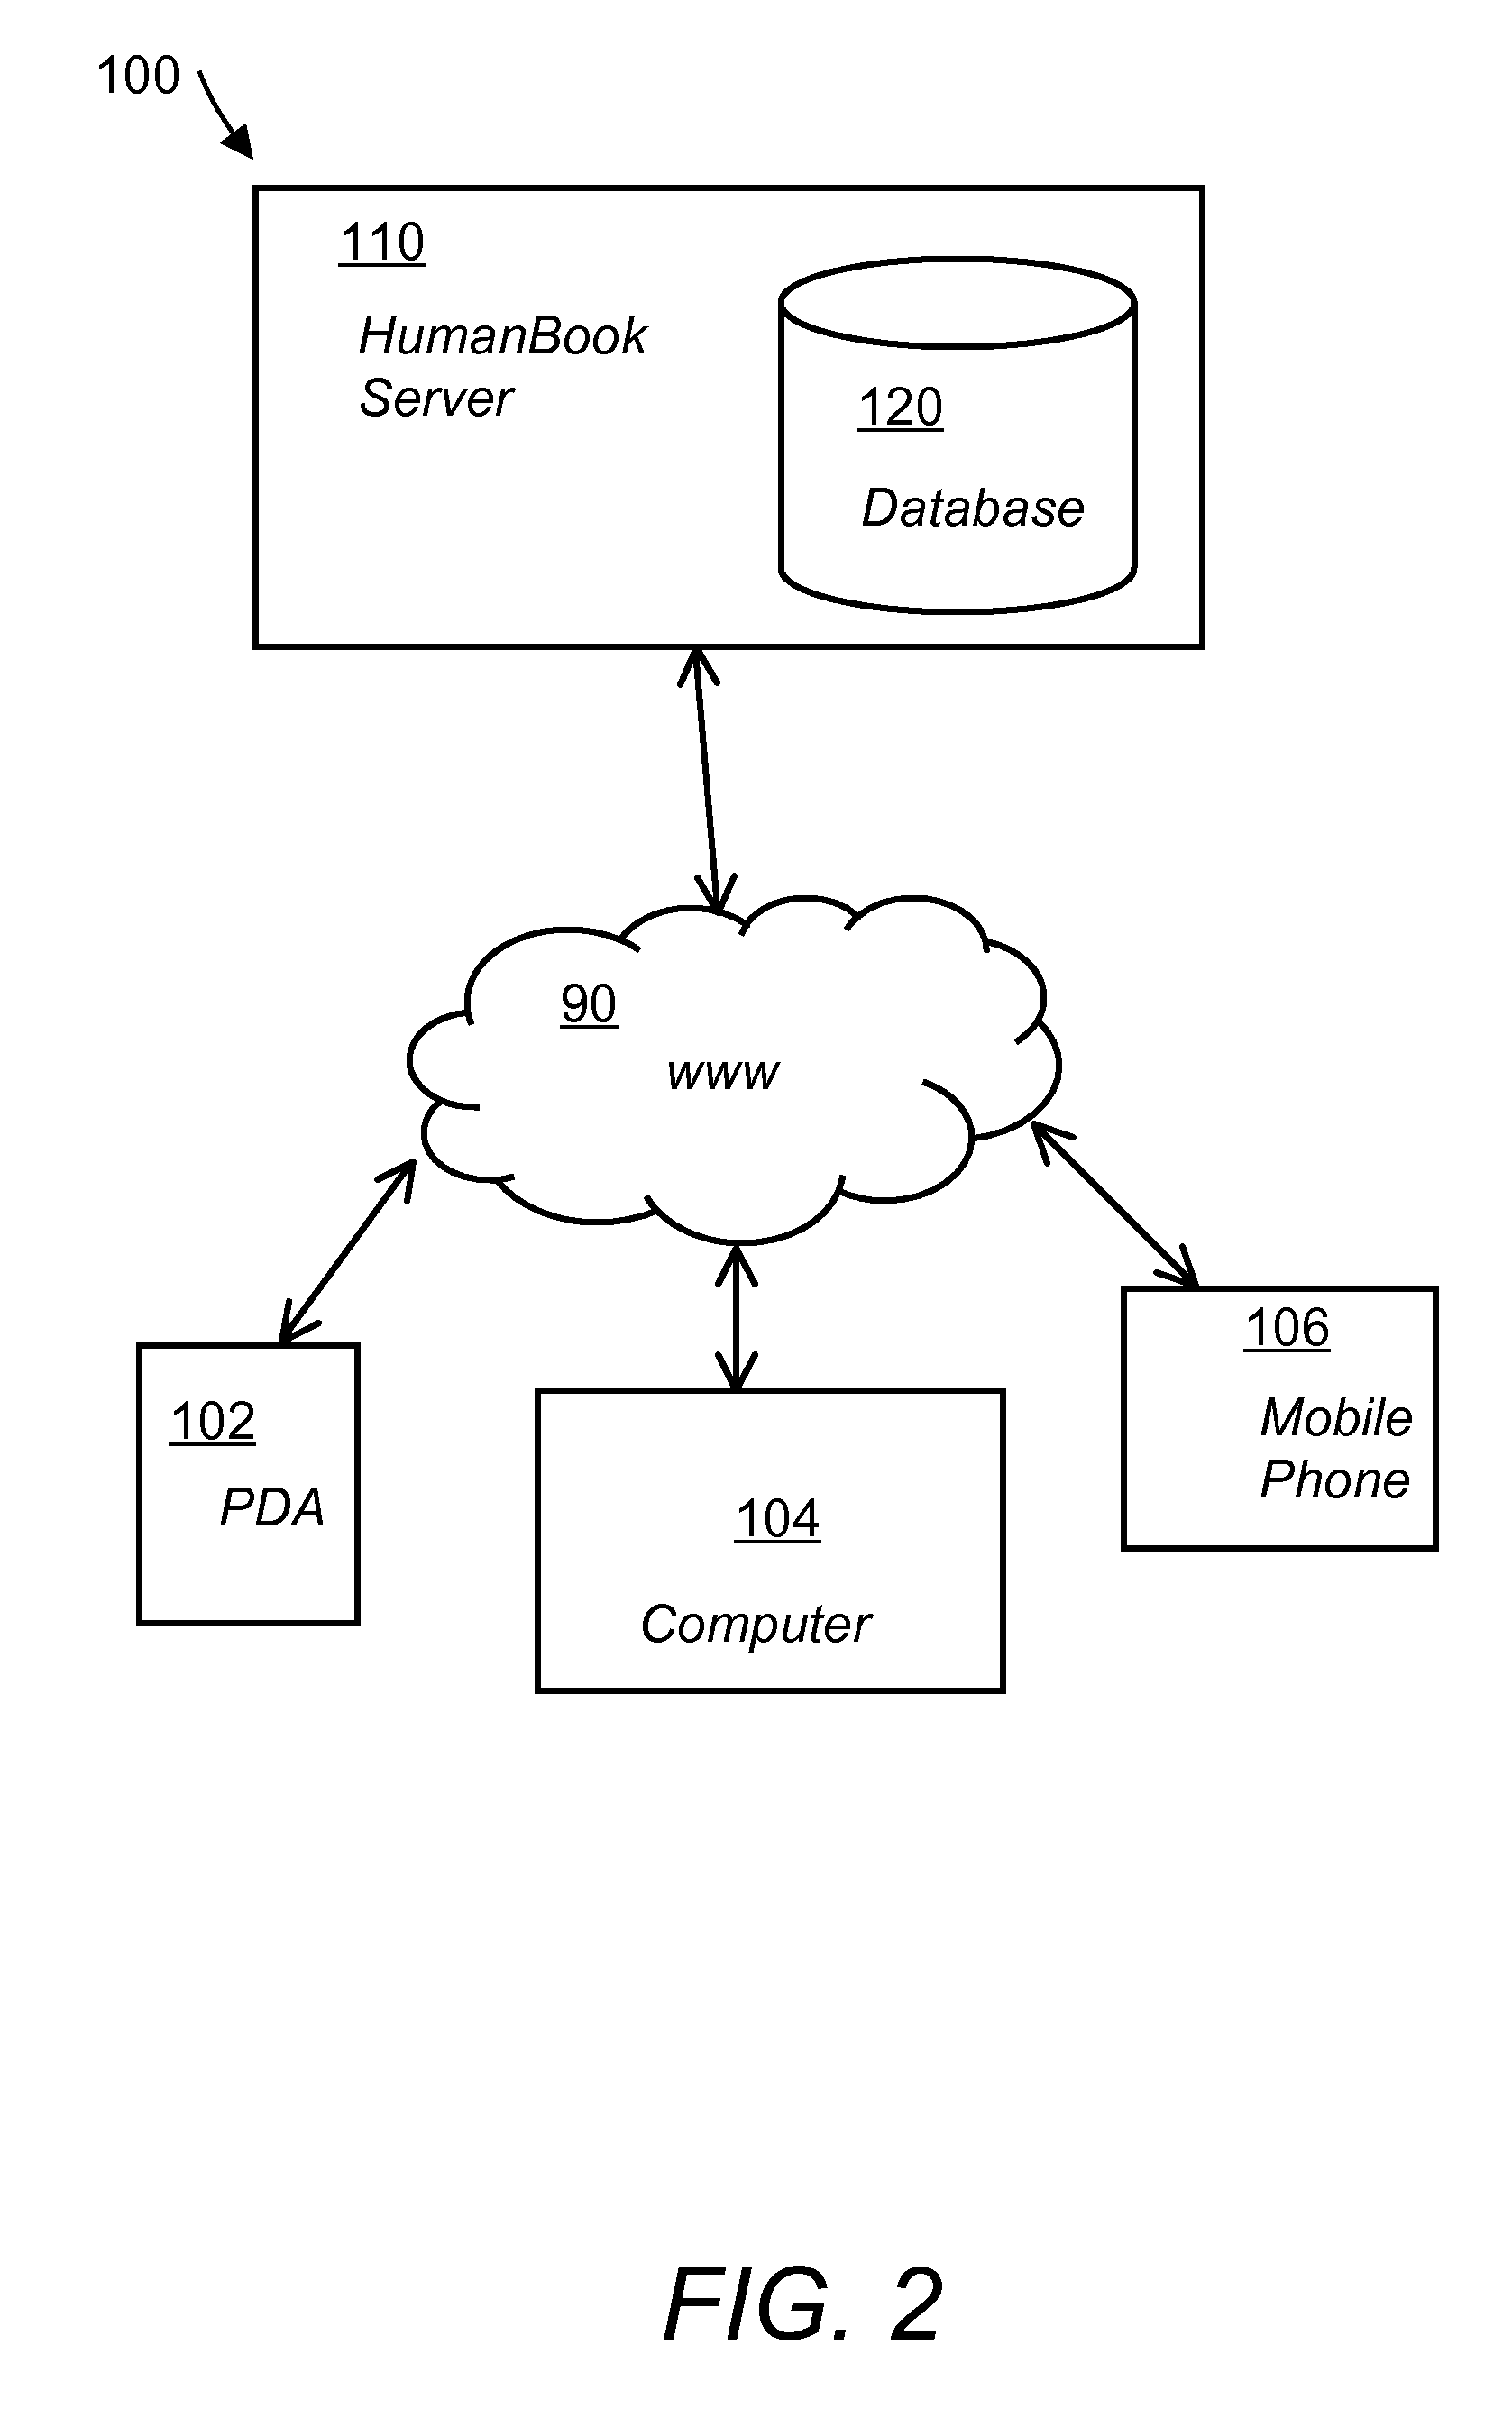 System and method for a web-based social networking database